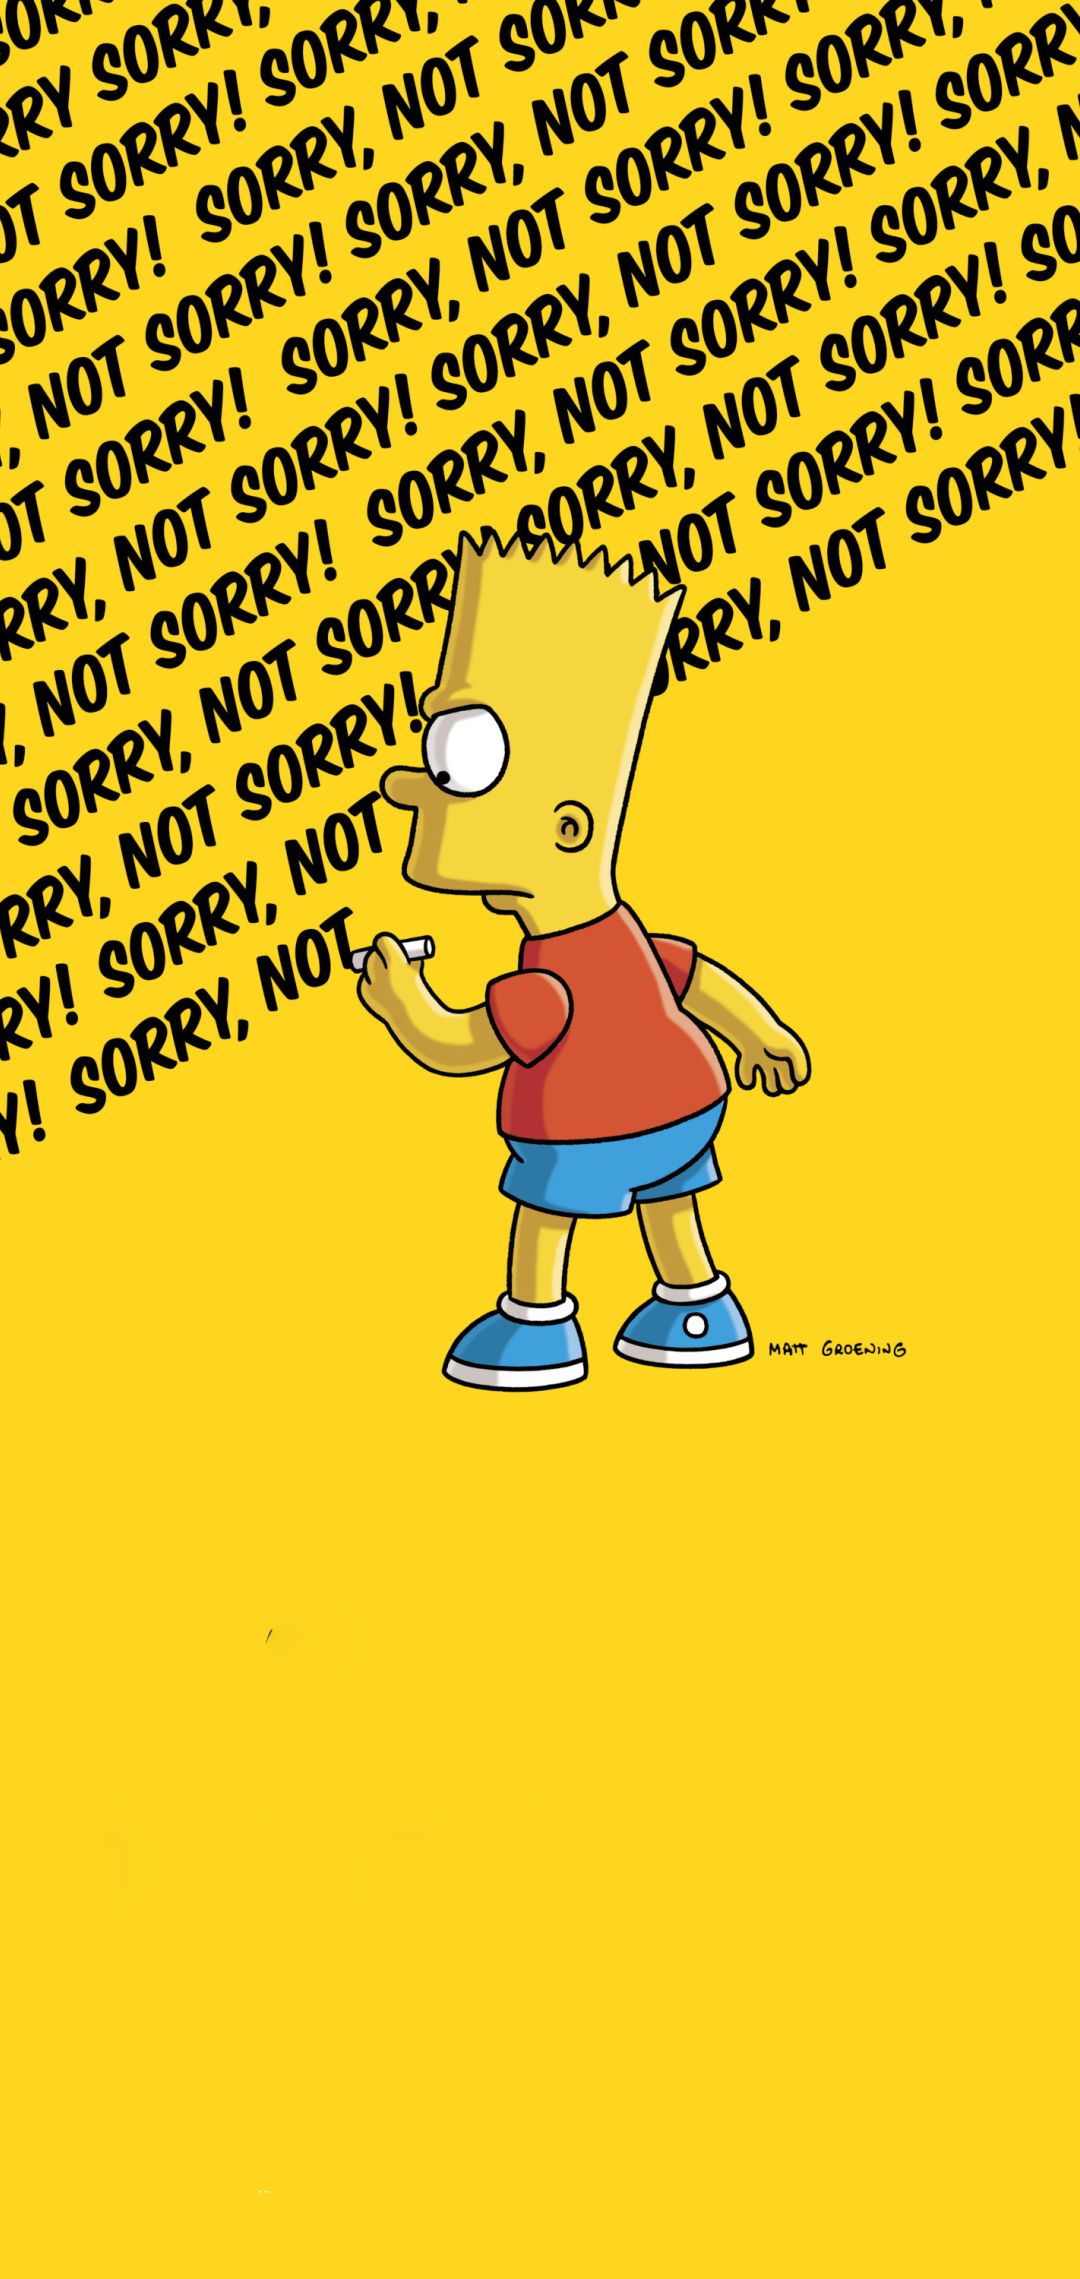 The simpsons wallpaper with a yellow background - The Simpsons